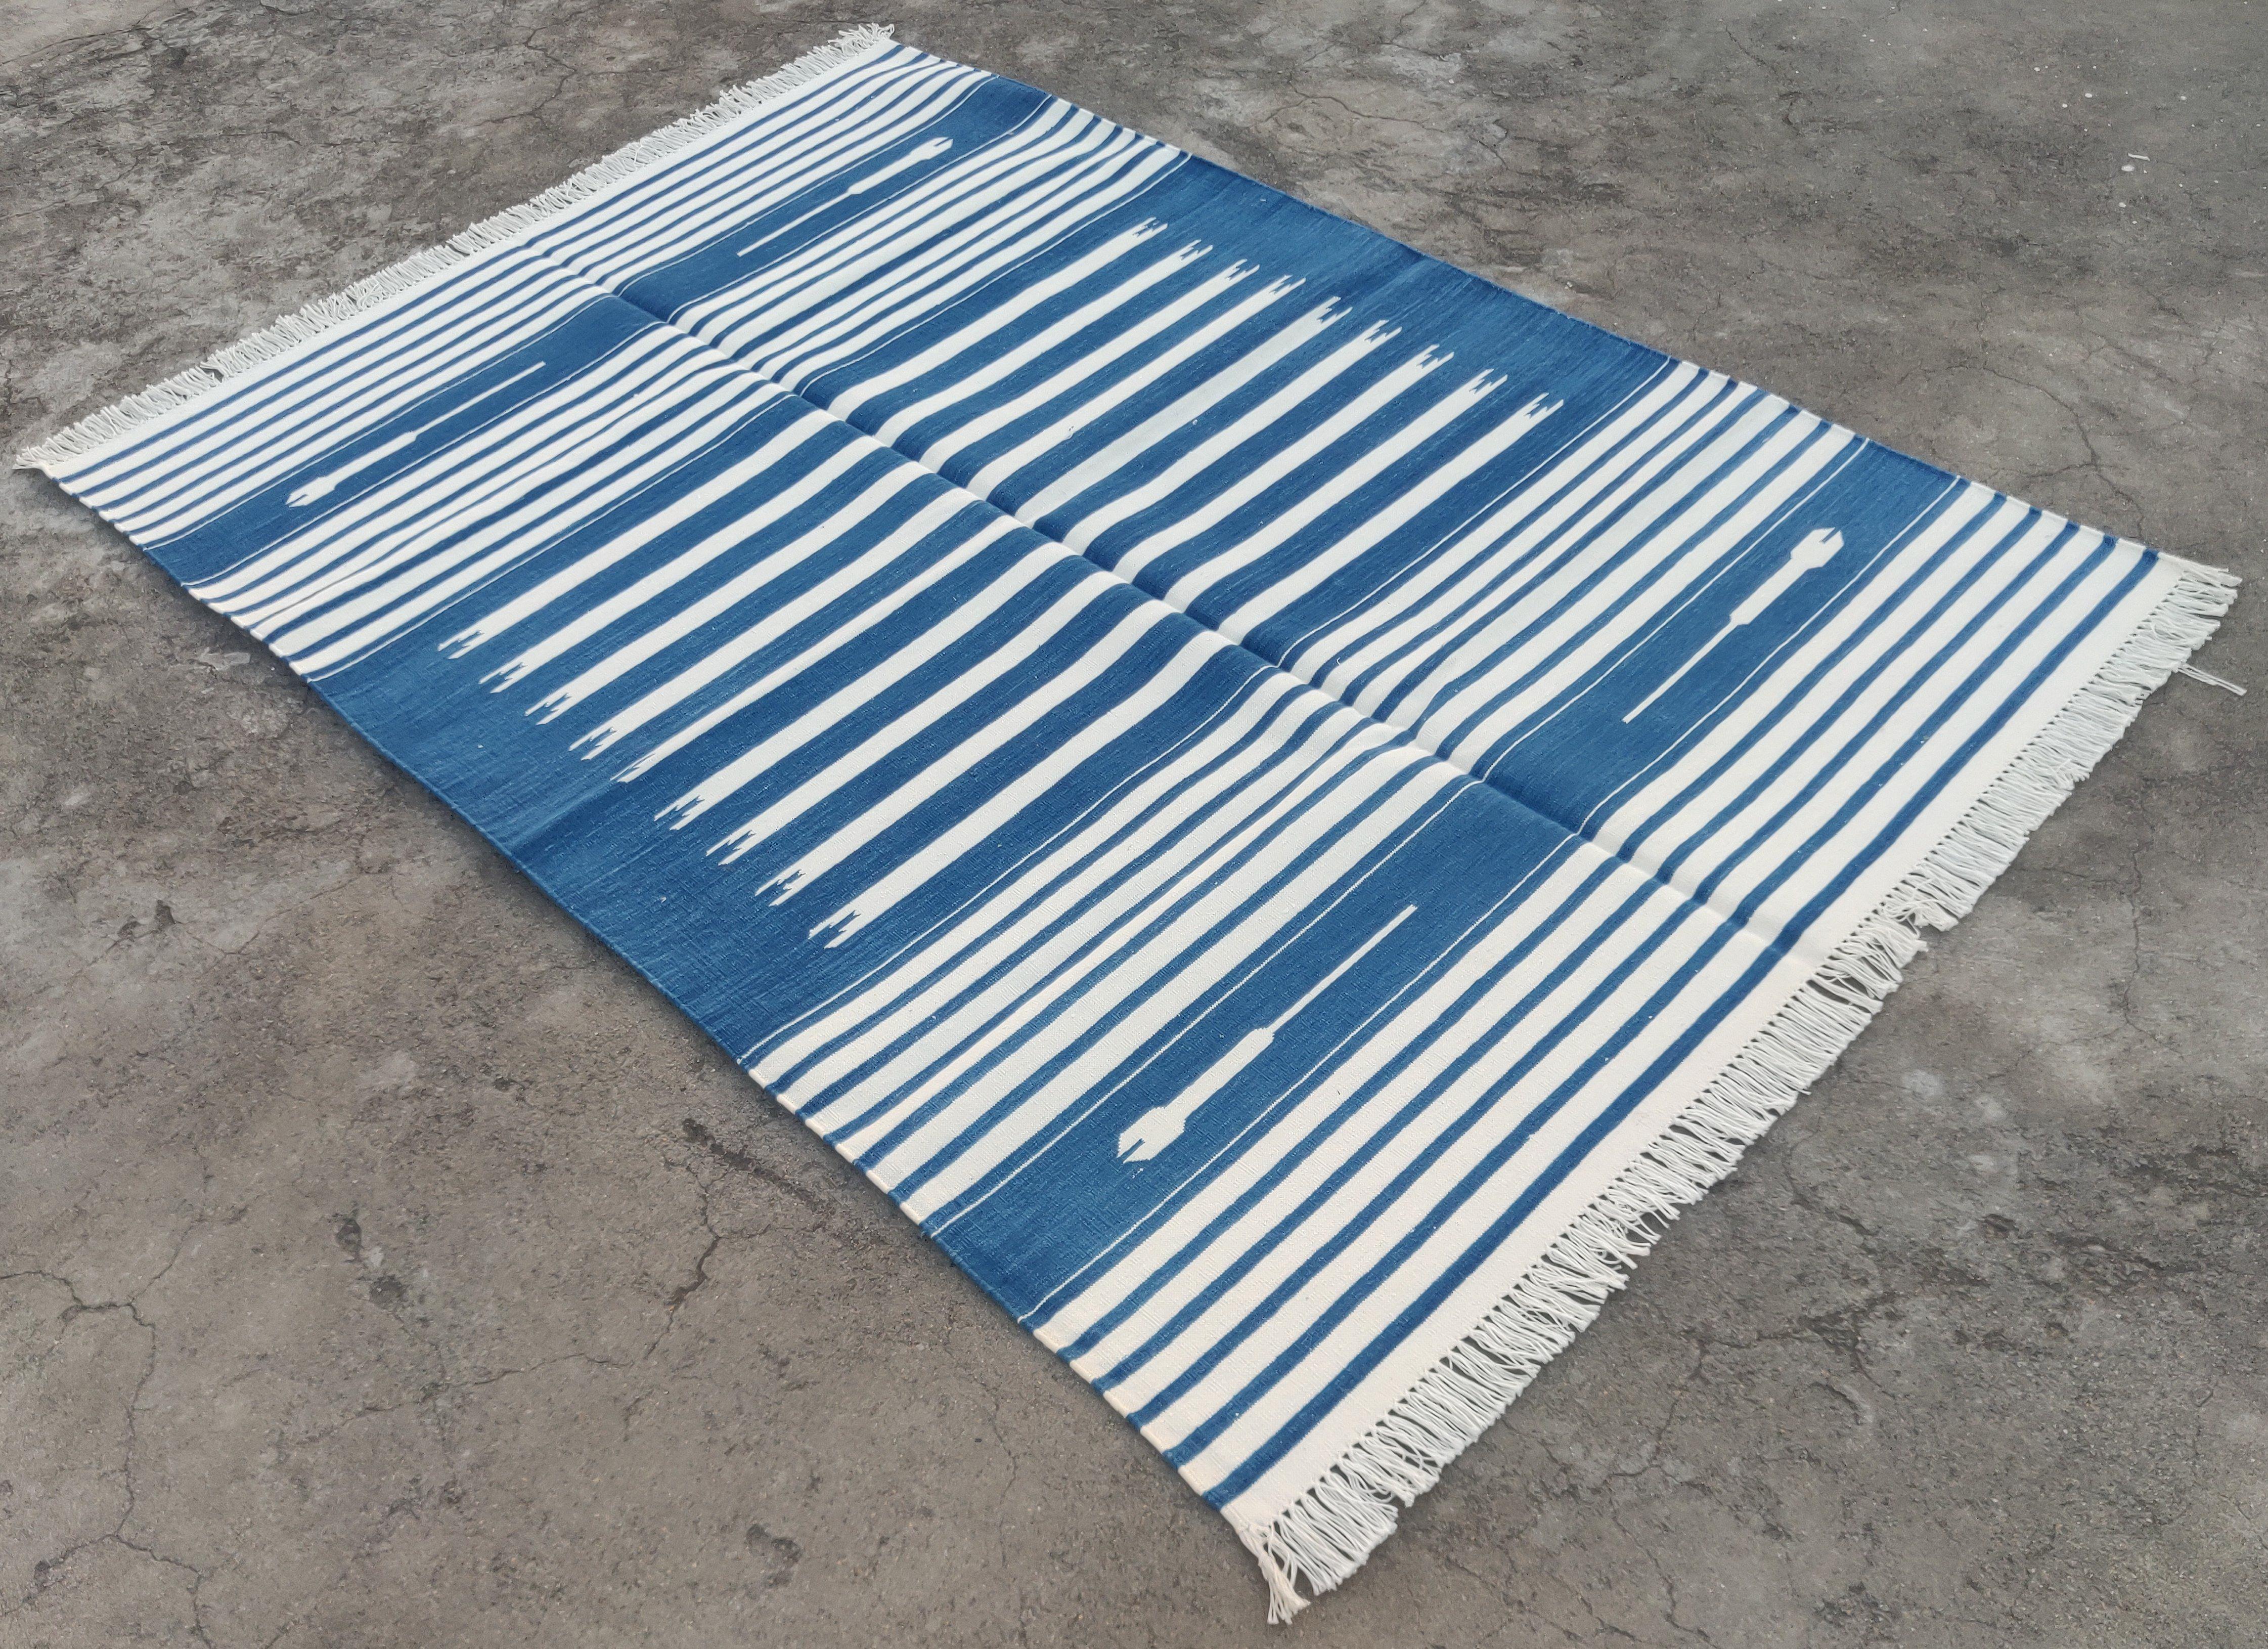 Cotton Vegetable Dyed Blue And White Striped Indian Dhurrie Rug-4'x6' 

These special flat-weave dhurries are hand-woven with 15 ply 100% cotton yarn. Due to the special manufacturing techniques used to create our rugs, the size and color of each